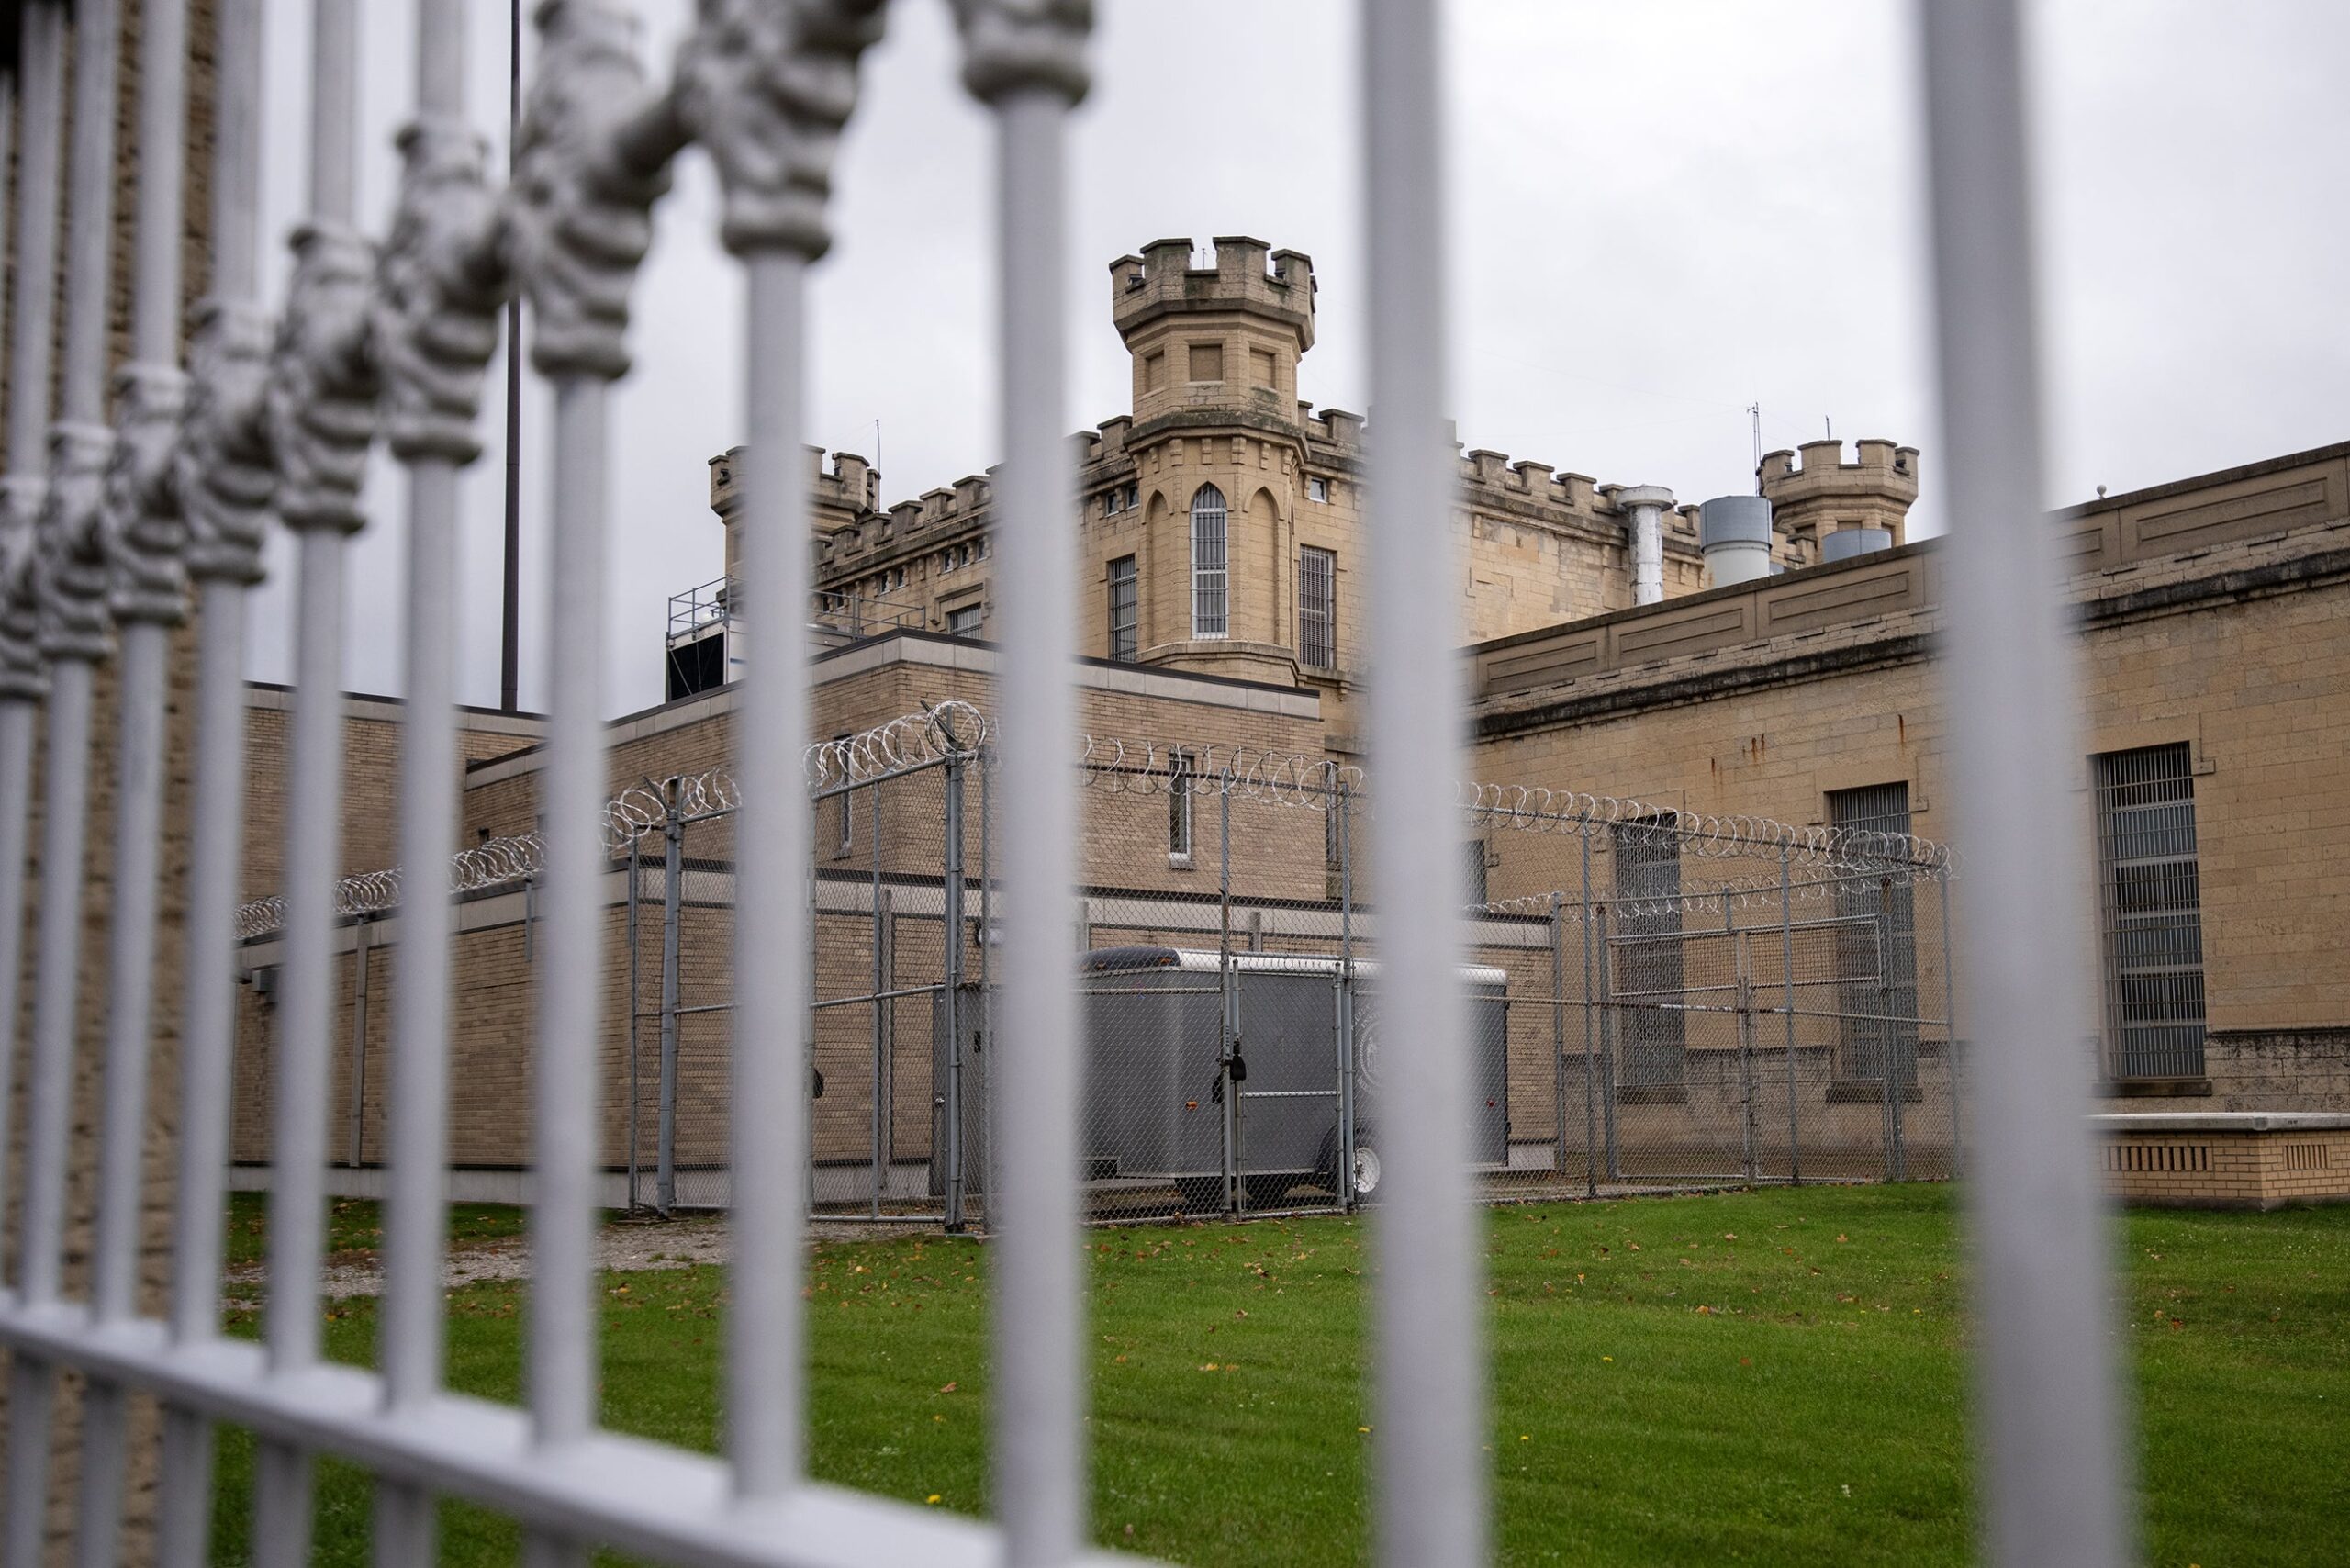 Attorney seeks external review of conditions at Waupun prison amid lawsuit